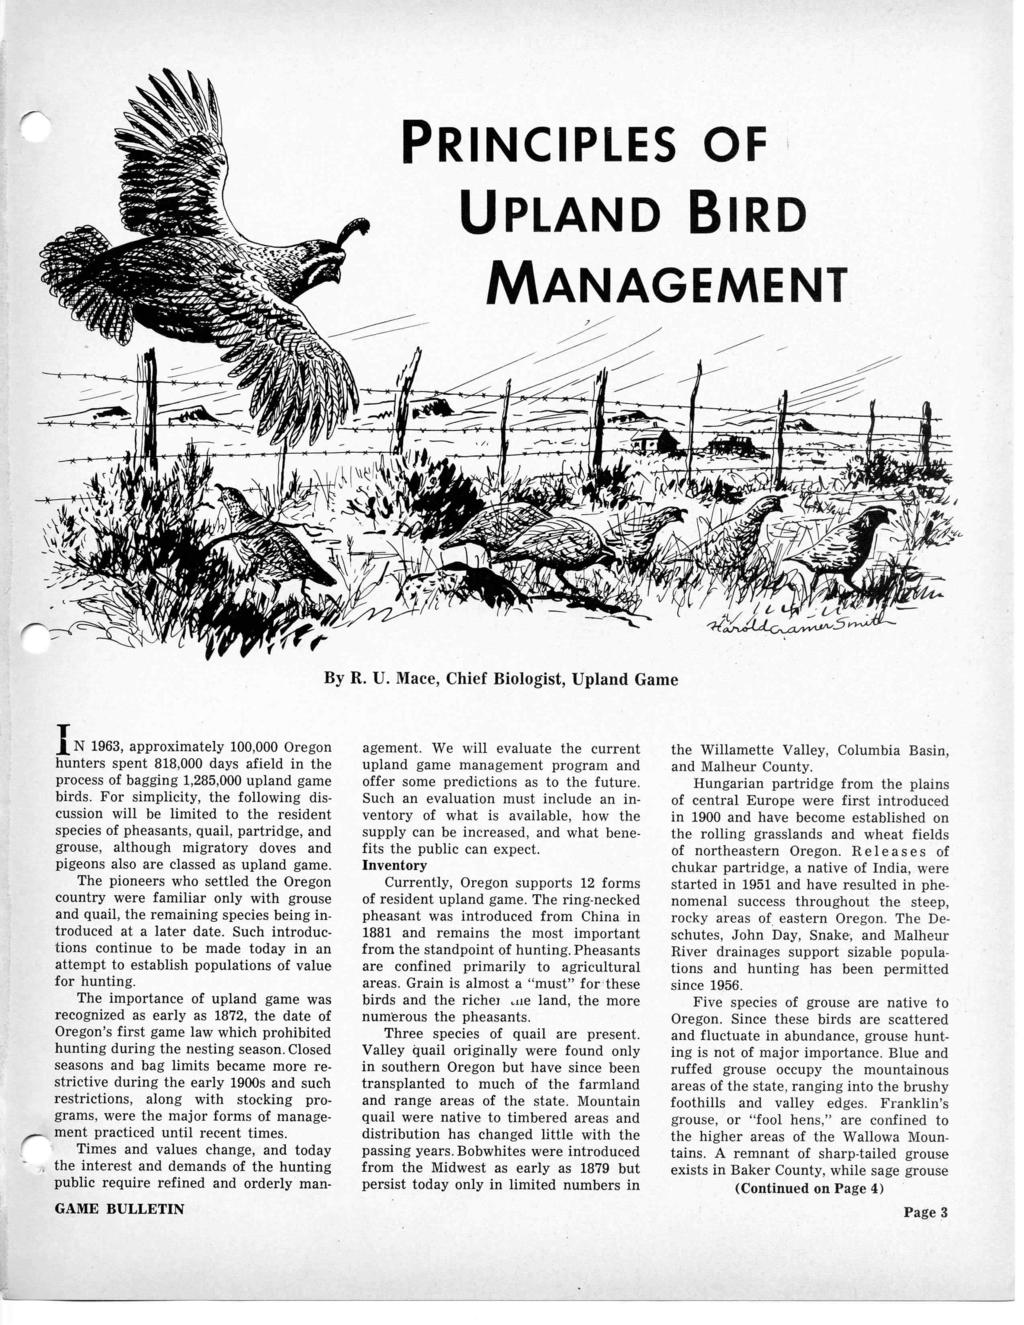 PRINCIPLES OF UPLAND BIRD MANAGEMENT 1111 /911111111 4,00 I 40, By R. U. Mace, Chief Biologist, Upland Game IN 1963, approximately 100,000 Oregon hunters spent 818,000 days afield in the process of bagging 1,285,000 upland game birds.